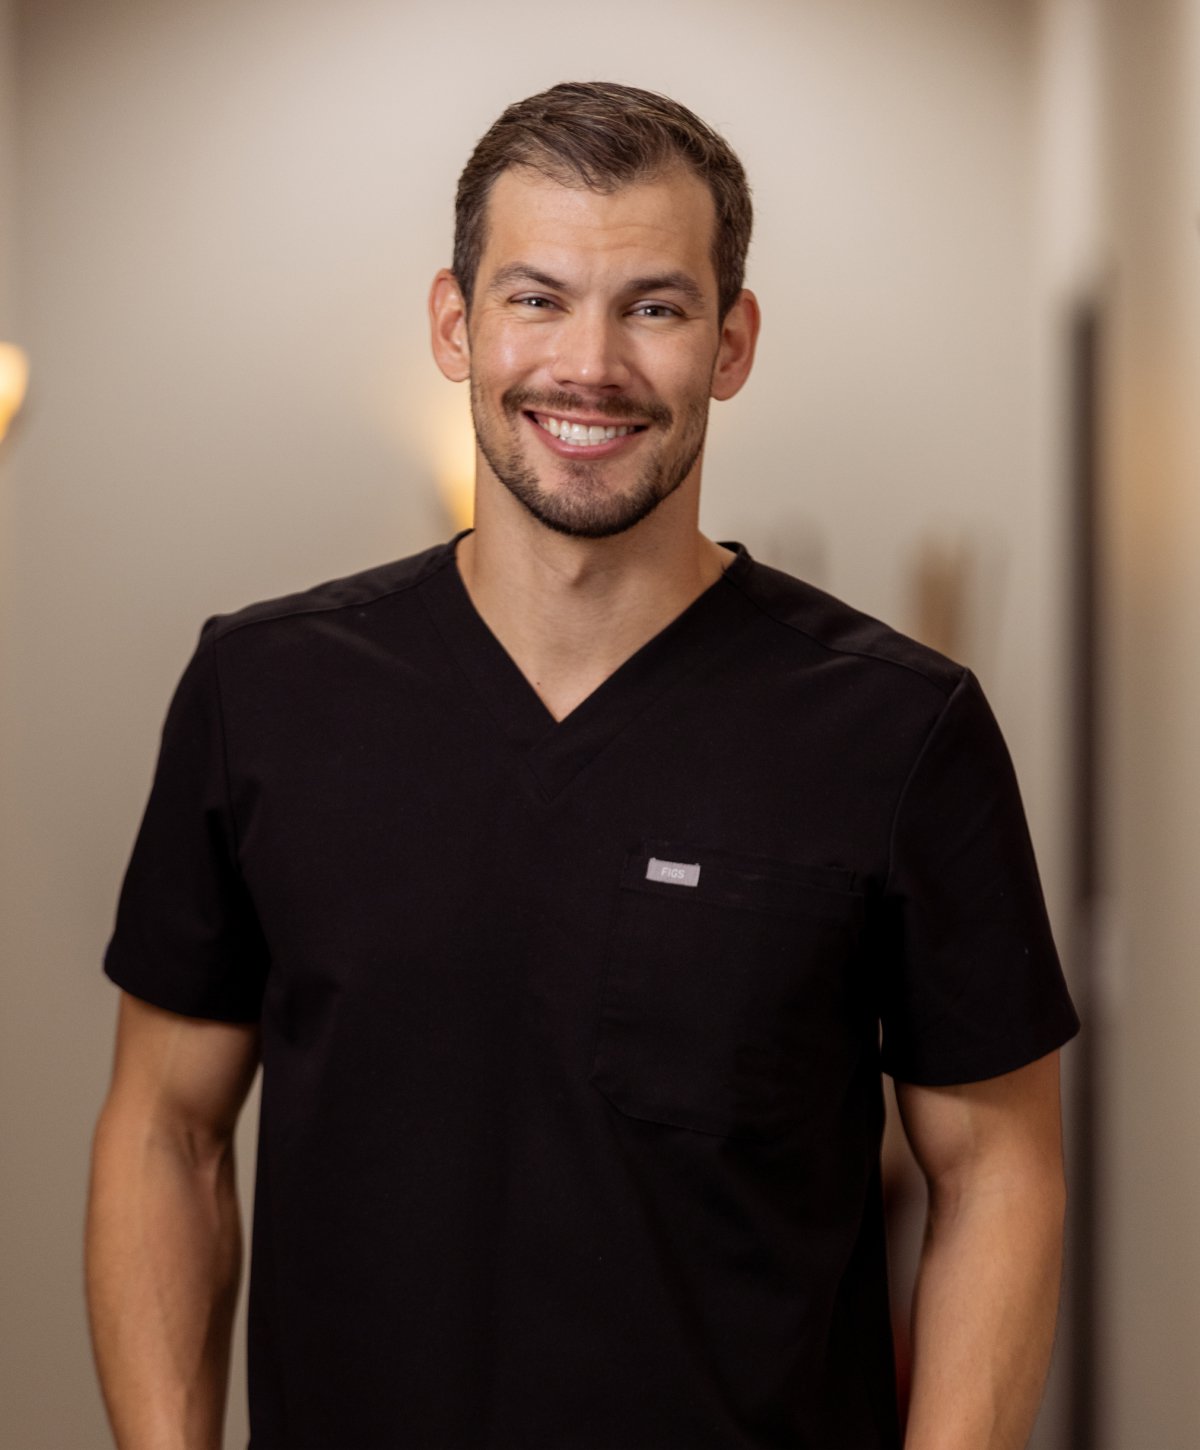 Jacob Cooley MEDICAL SPA MANAGER